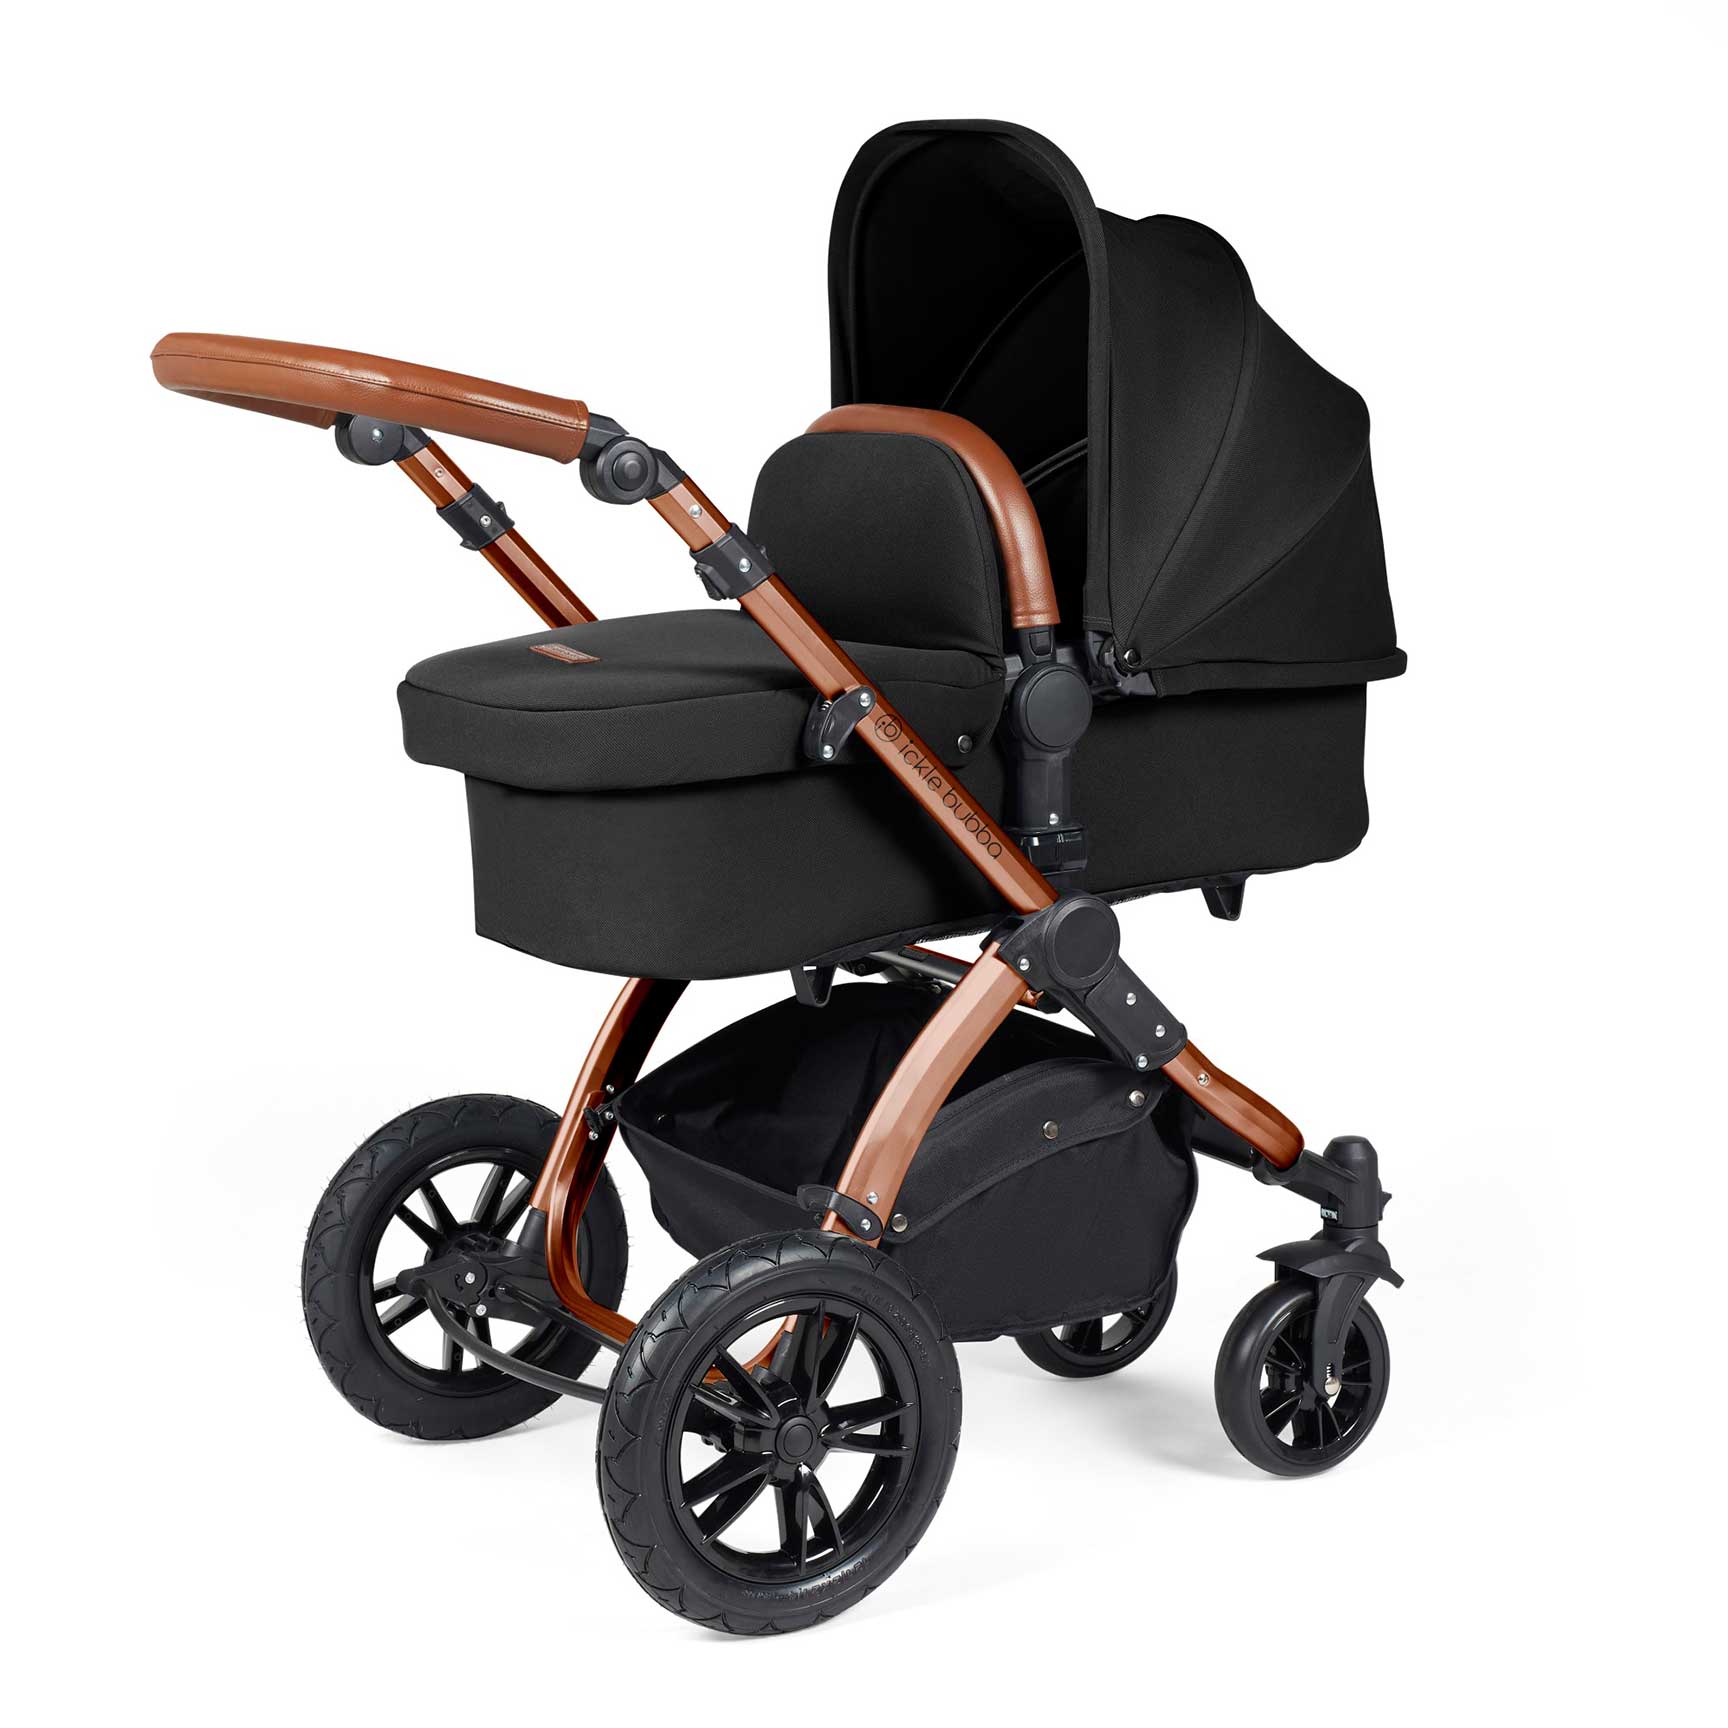 Ickle Bubba travel systems Ickle Bubba Stomp Luxe 2 in 1 Plus Pushchair & Carrycot - Bronze/Midnight/Tan 10-003-001-021